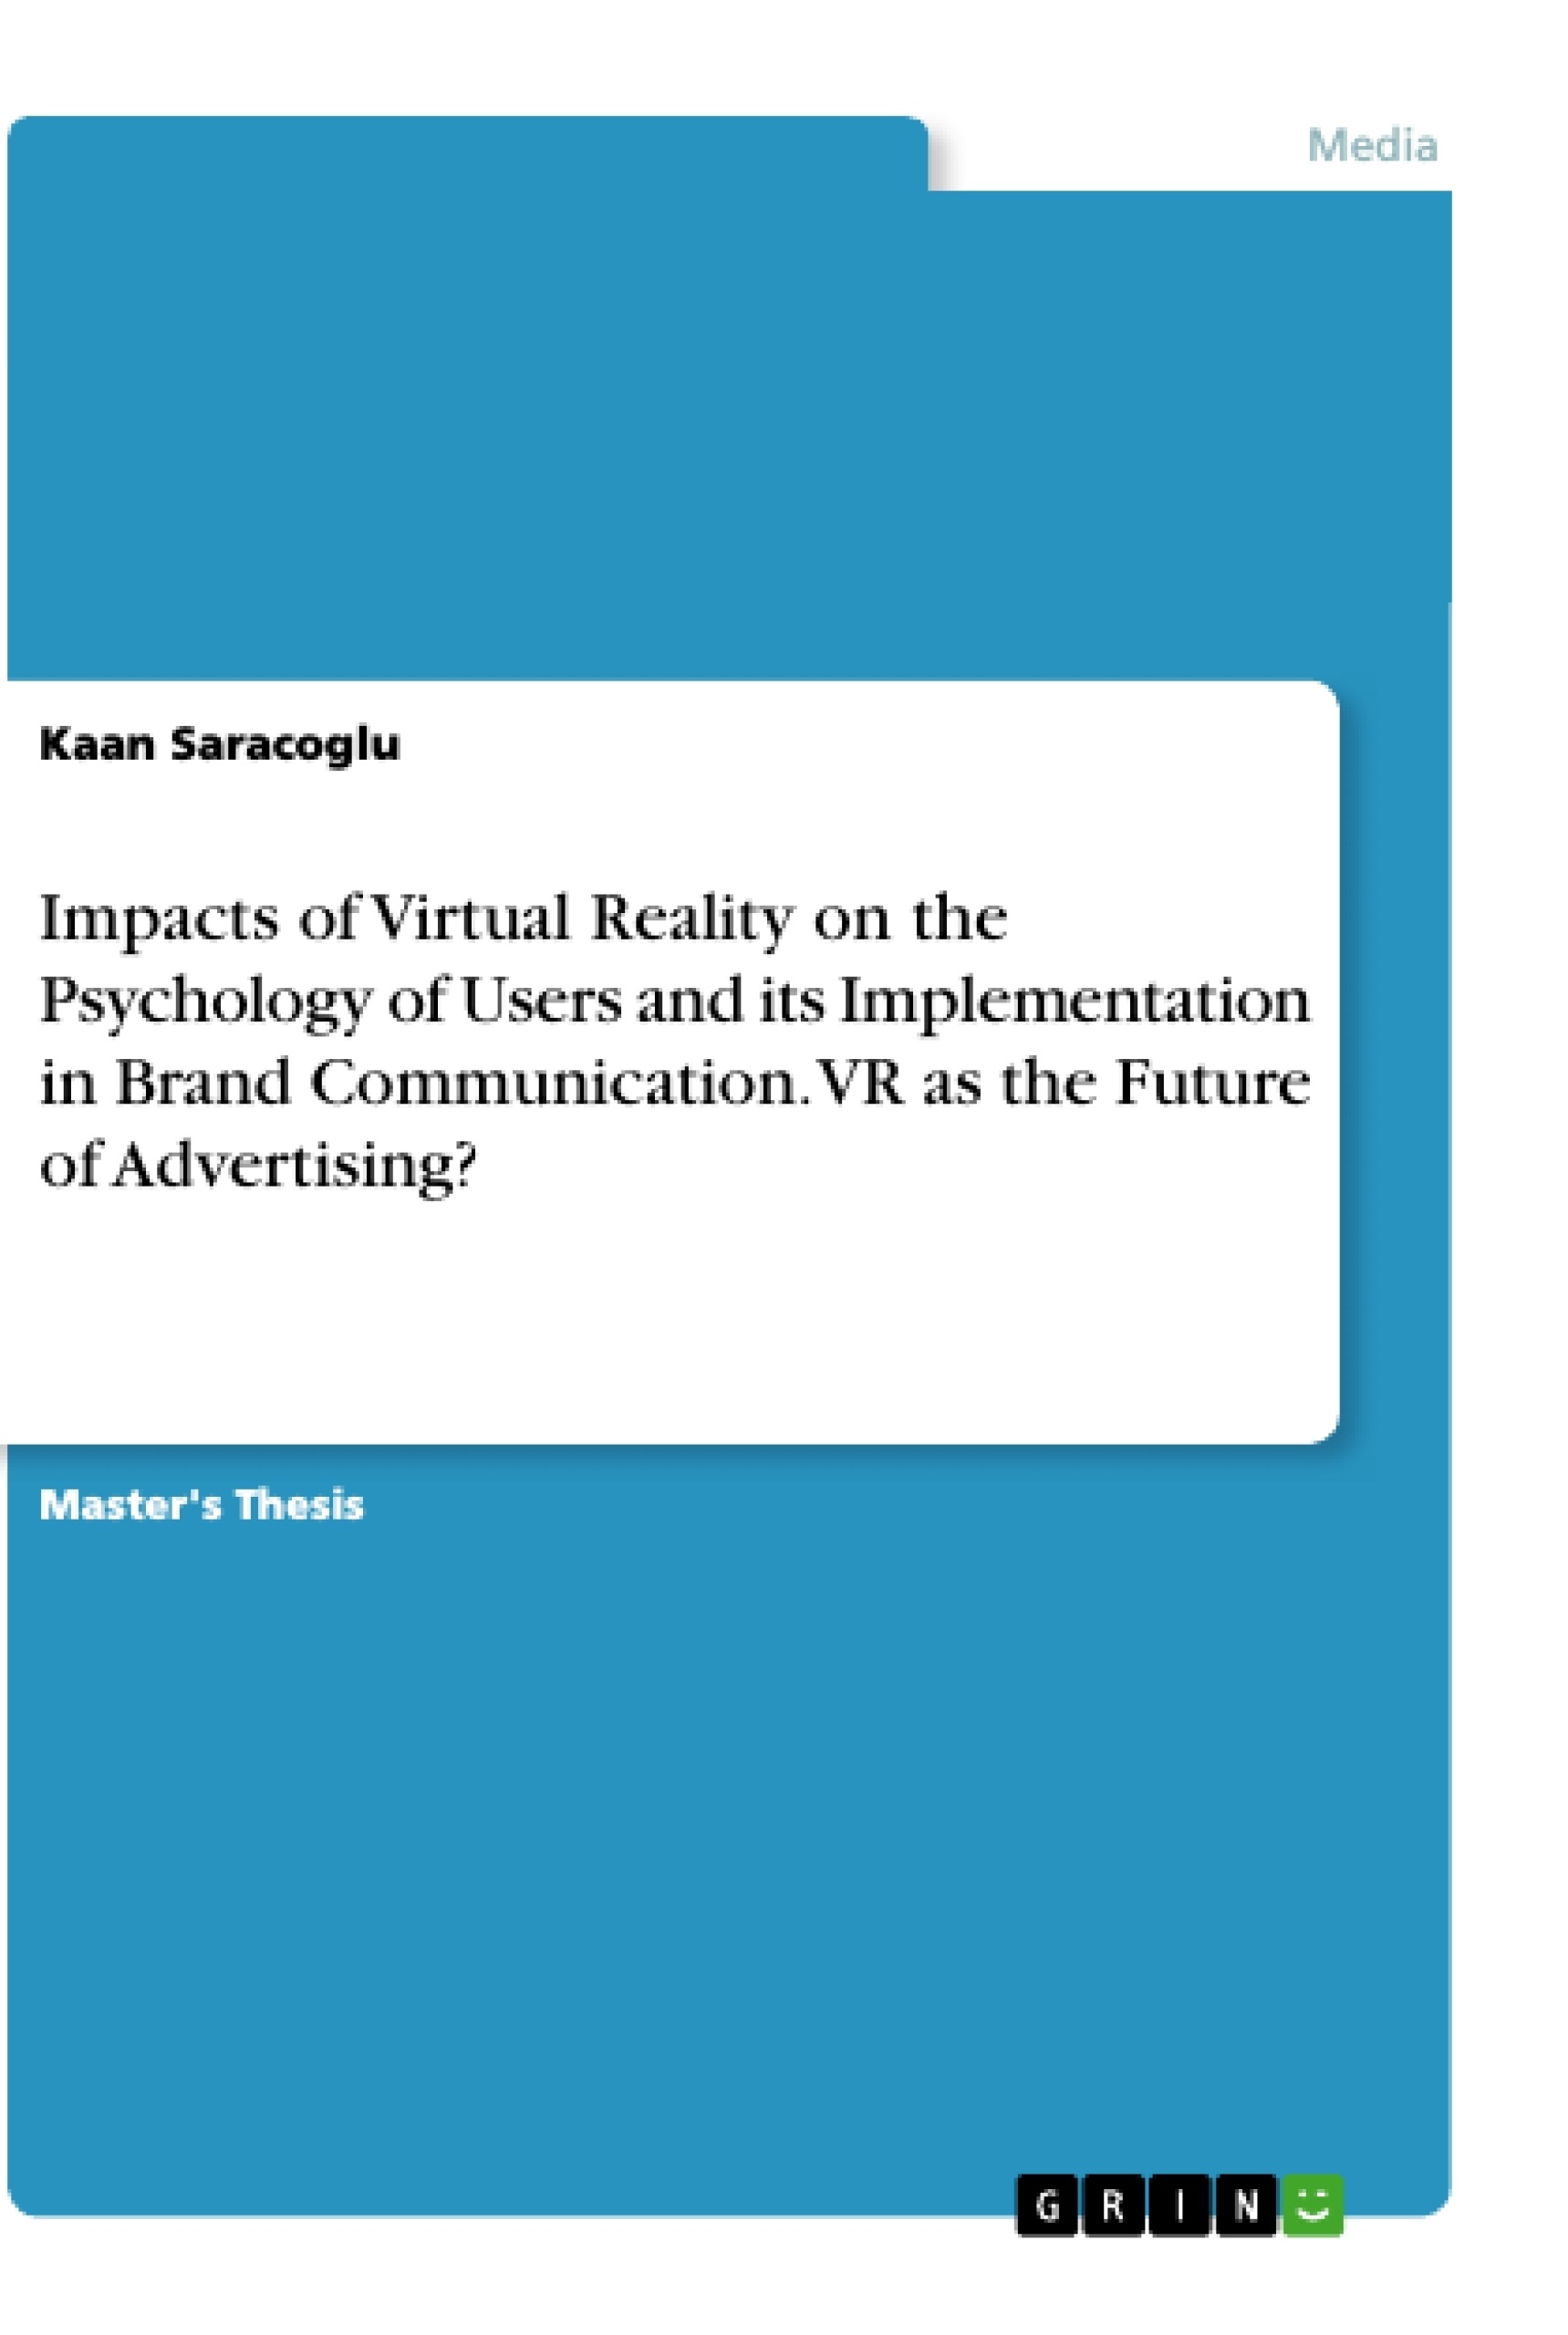 Title: Impacts of Virtual Reality on the Psychology of Users and its Implementation in Brand Communication. VR as the Future of Advertising?